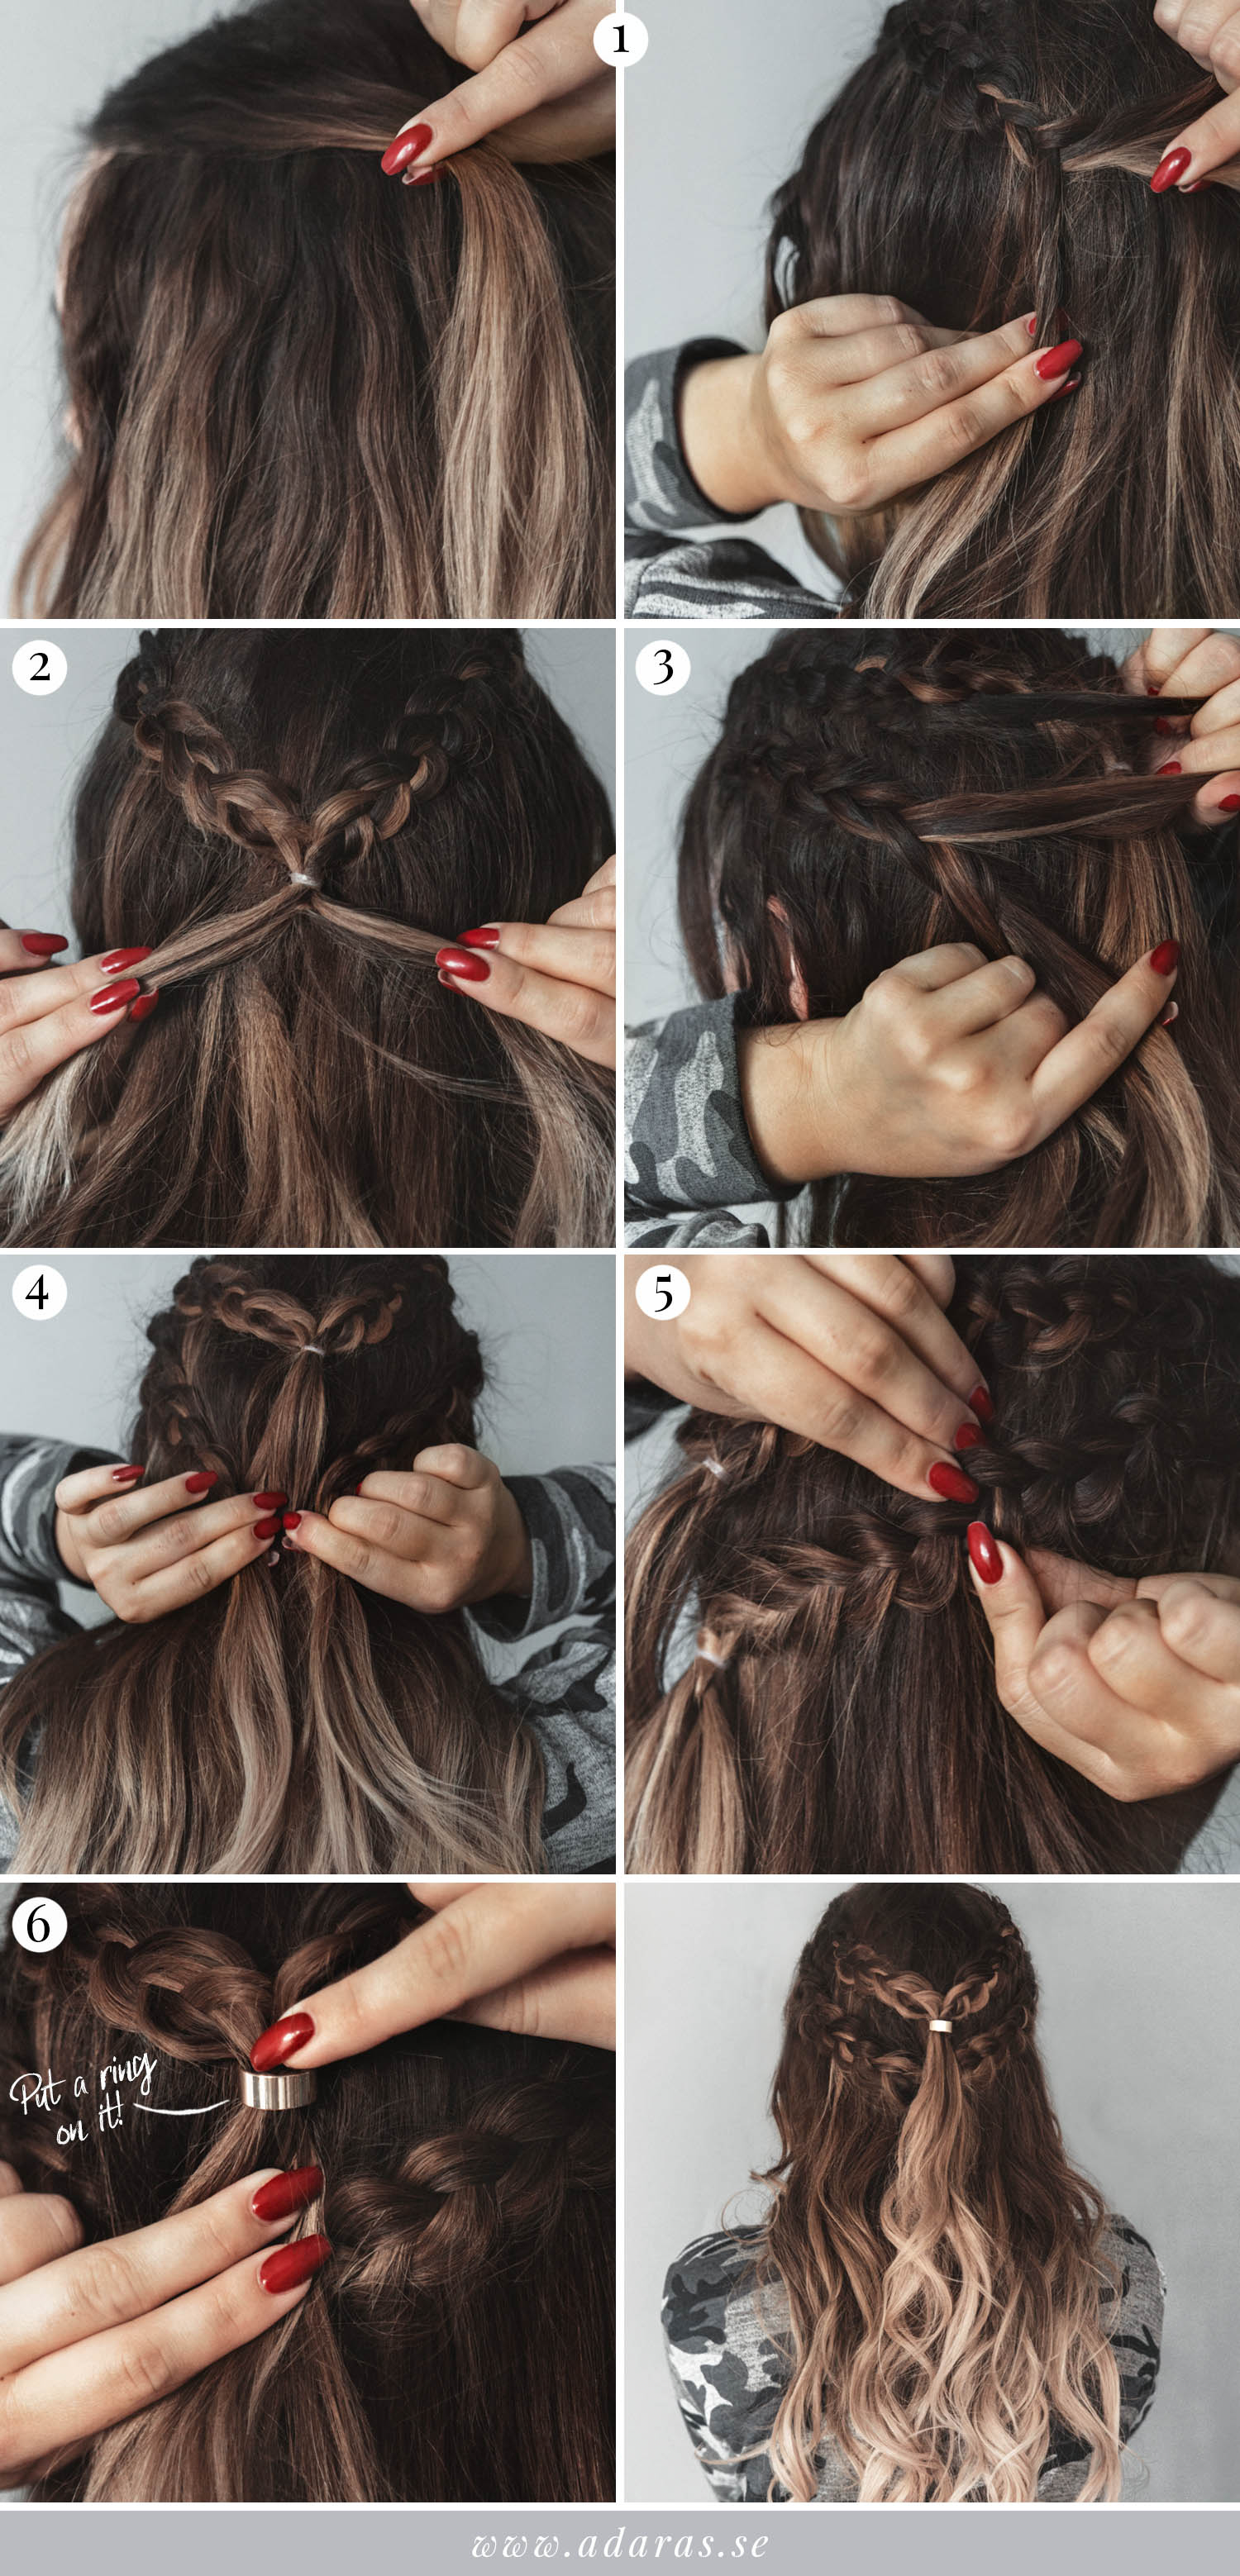 Hair Tutorial: How to get a Khaleesi Hairstyle with braids - in 6 Simple Steps